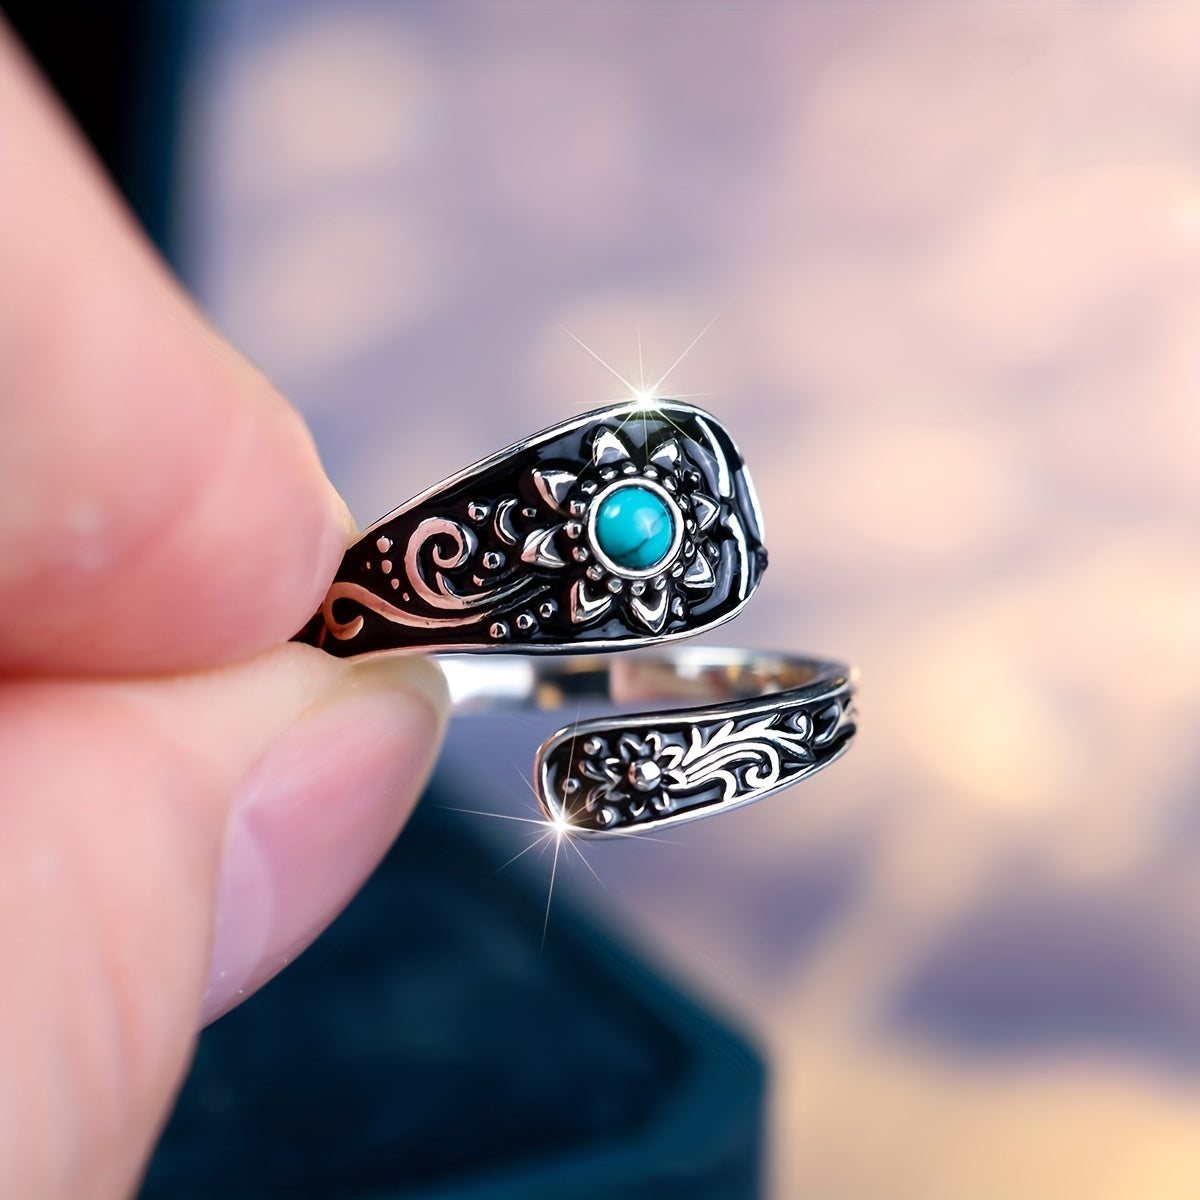 925 Sterling Silver Spoon Ring Classy Sunflower Carving Paved Turquoise Match Daily Outfits Highlight The Ecological Value Or Reuse High Quality Wedding Jewelry 3.4g\u002F0.12oz